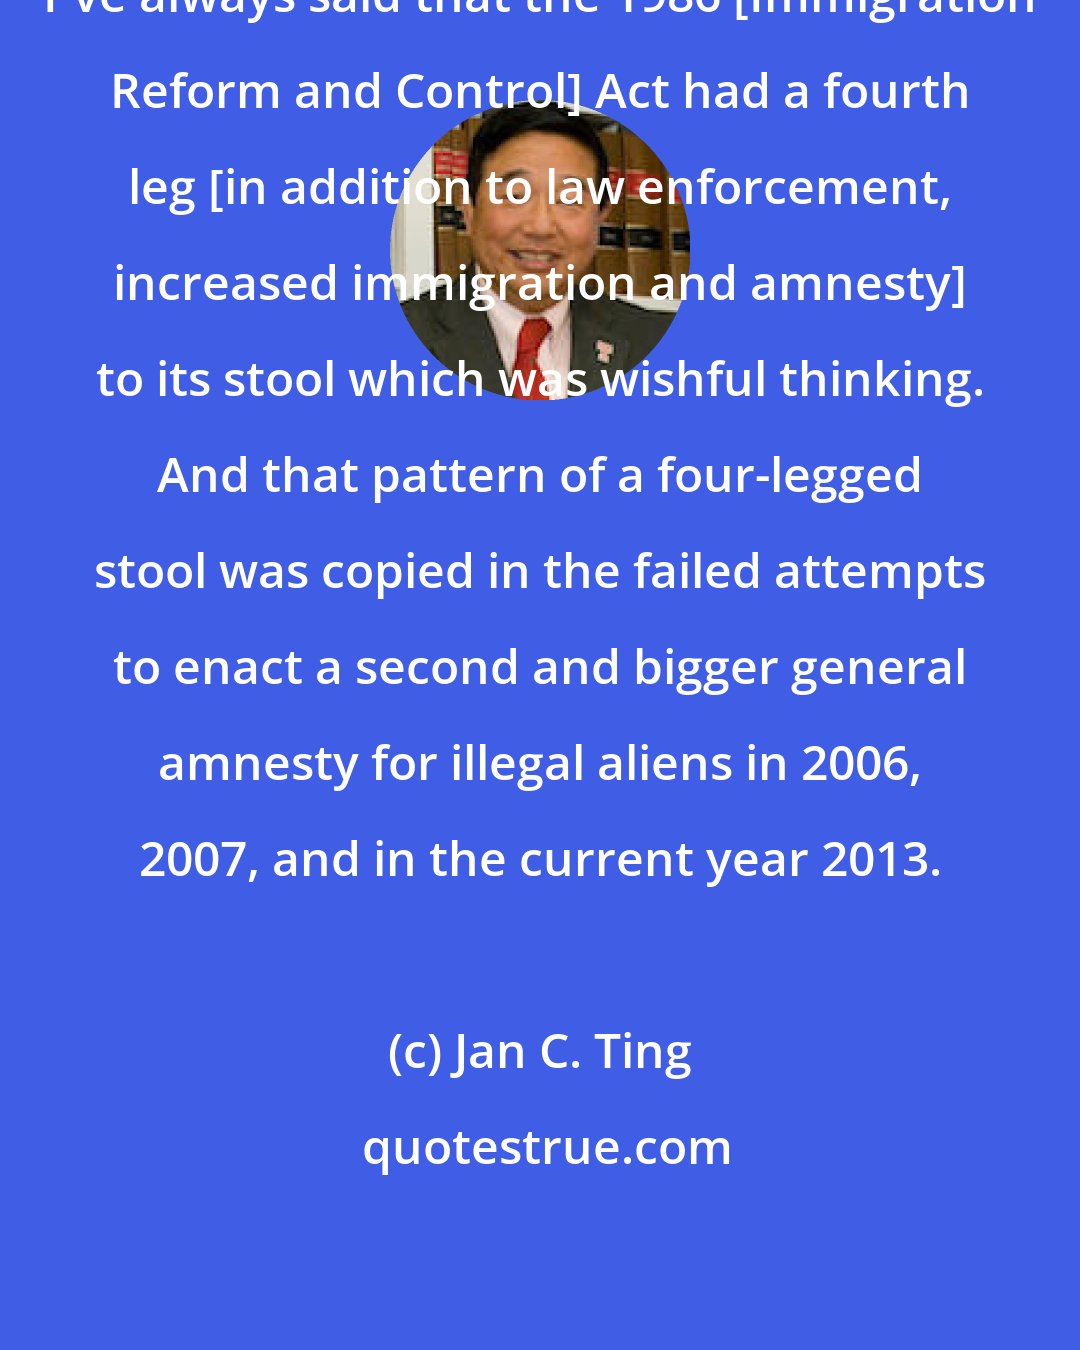 Jan C. Ting: I've always said that the 1986 [Immigration Reform and Control] Act had a fourth leg [in addition to law enforcement, increased immigration and amnesty] to its stool which was wishful thinking. And that pattern of a four-legged stool was copied in the failed attempts to enact a second and bigger general amnesty for illegal aliens in 2006, 2007, and in the current year 2013.